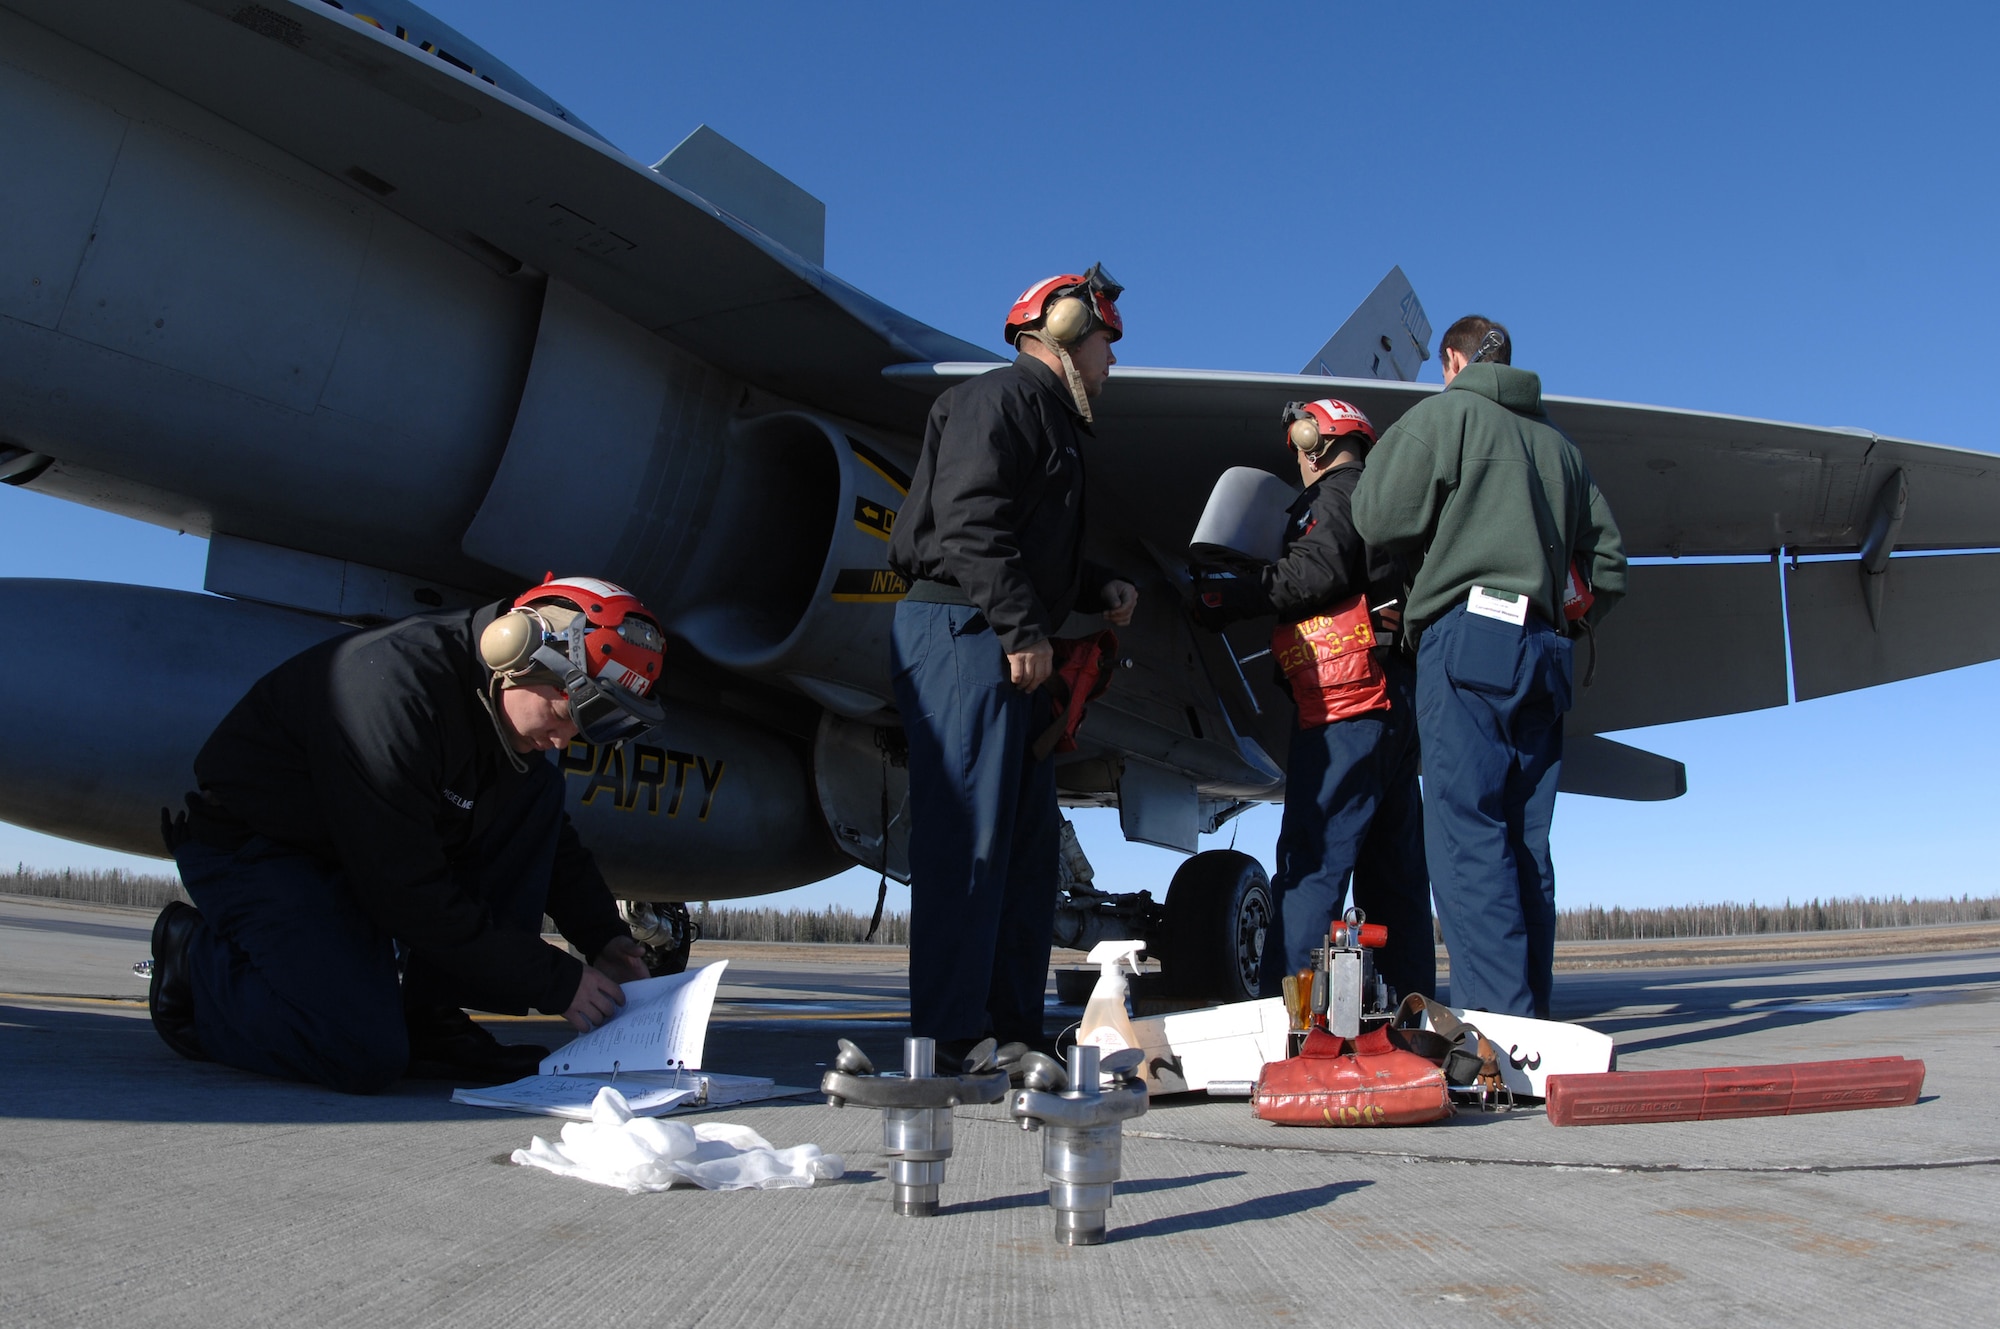 EIELSON AIR FORCE BASE, Alaska -- Members of Strike Fighter Squadron Eight Seven (VFA-87) perform maintenance on a Navy F/A-18 during Red Flag-Alaska 07-1. VFA-87 is home based at Naval Air Station Oceana, Virginia. Red Flag-Alaska is a Pacific Air Forces-directed field training exercise for U.S. forces flown under simulated air combat conditions. It is conducted on the Pacific Alaskan Range Complex with air operations flown out of Eielson and Elmendorf Air Force Bases. (U.S. Air Force Photo by Staff Sgt Joshua Strang)